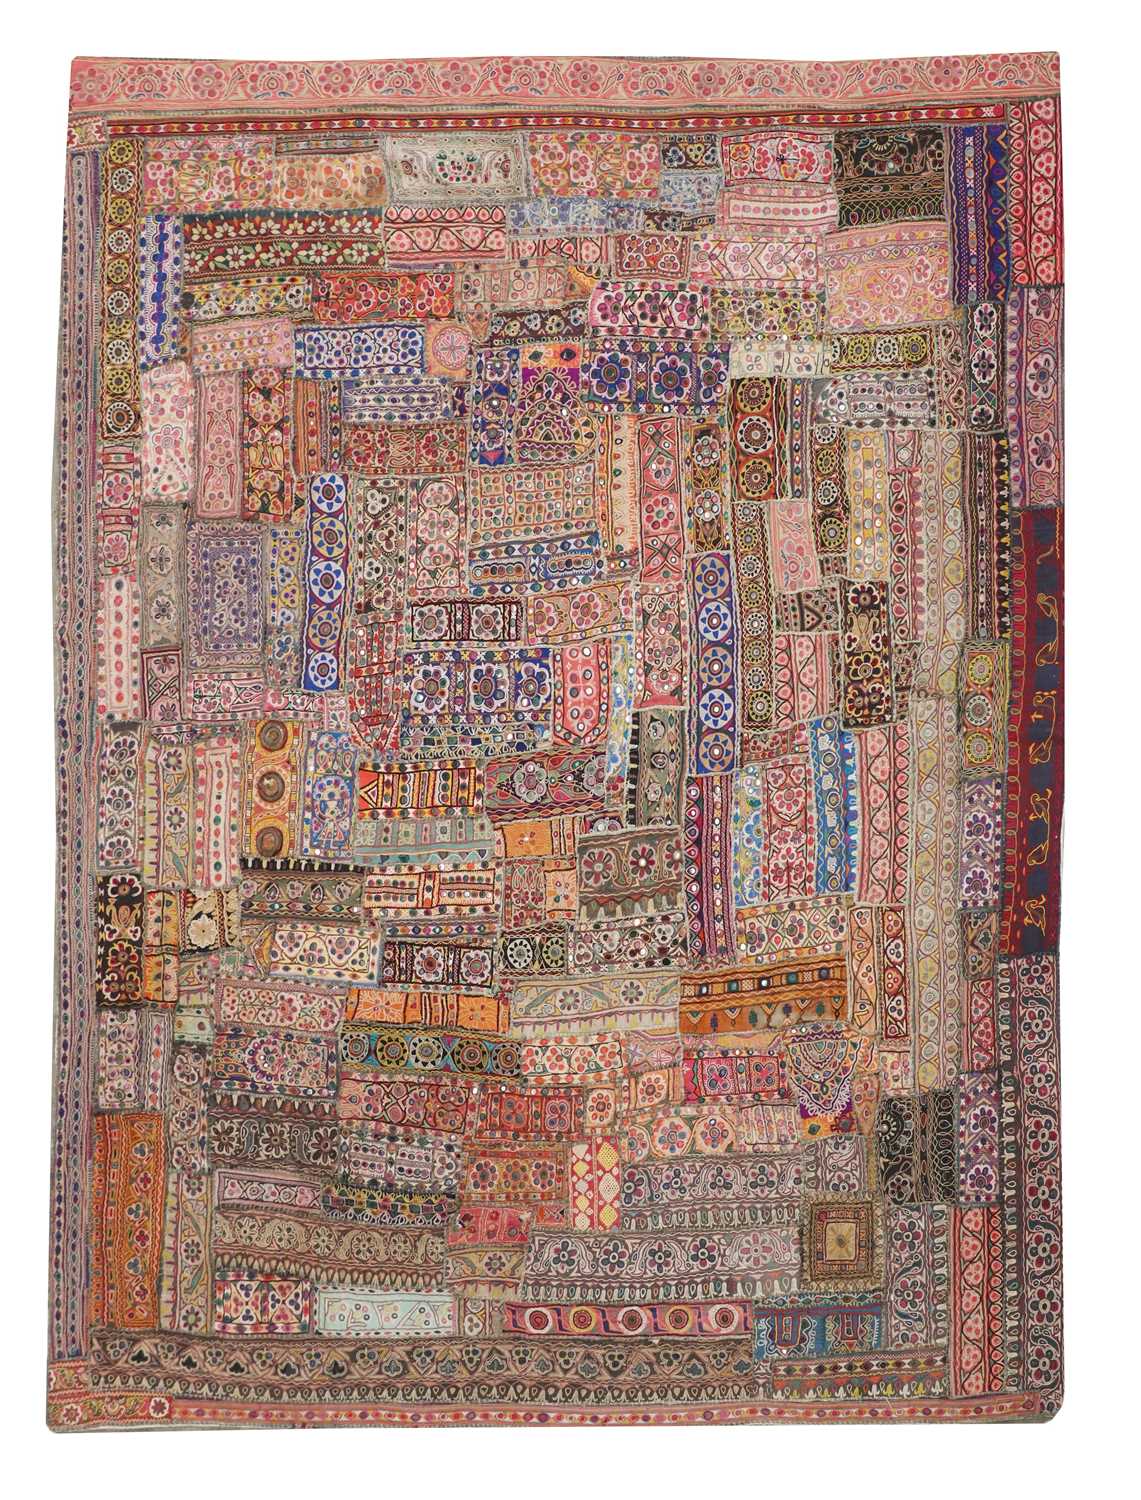 Lot 229 - An Indian shisha embroidered patchwork cloth